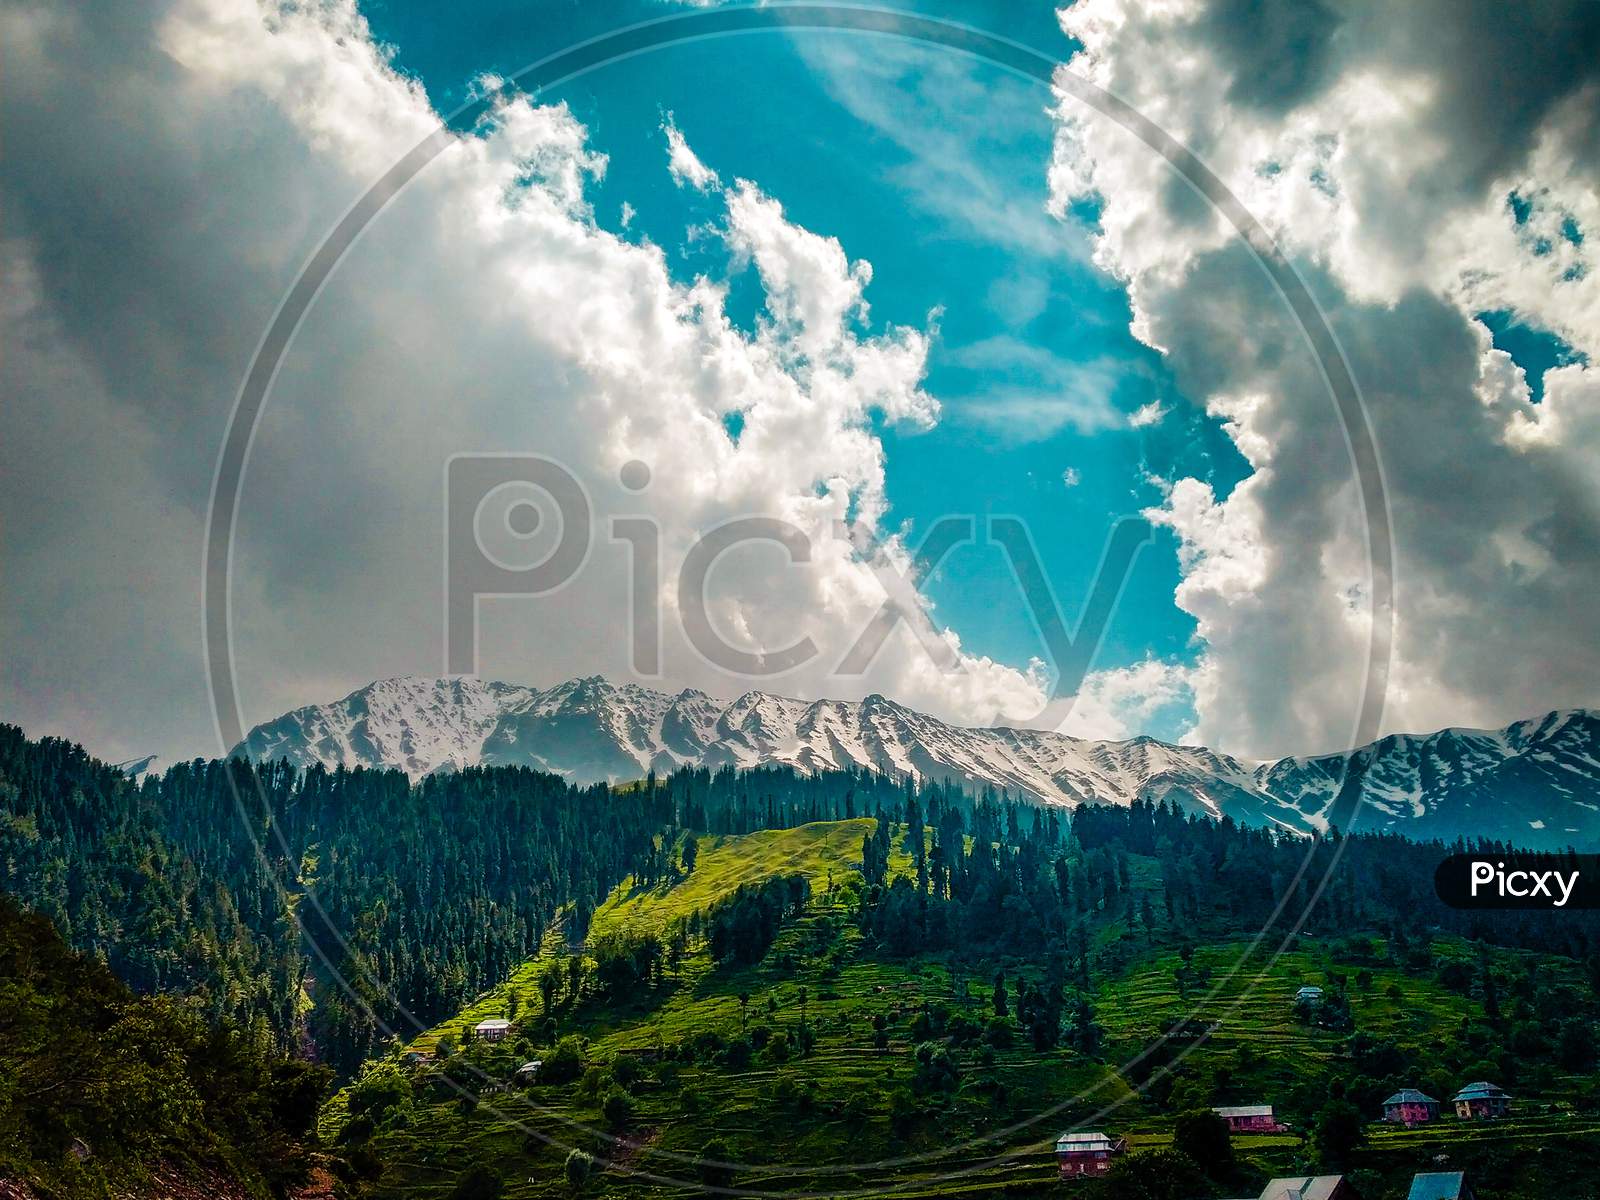 Landscape Of Snow Capped Mountains & The Cloudy Sky